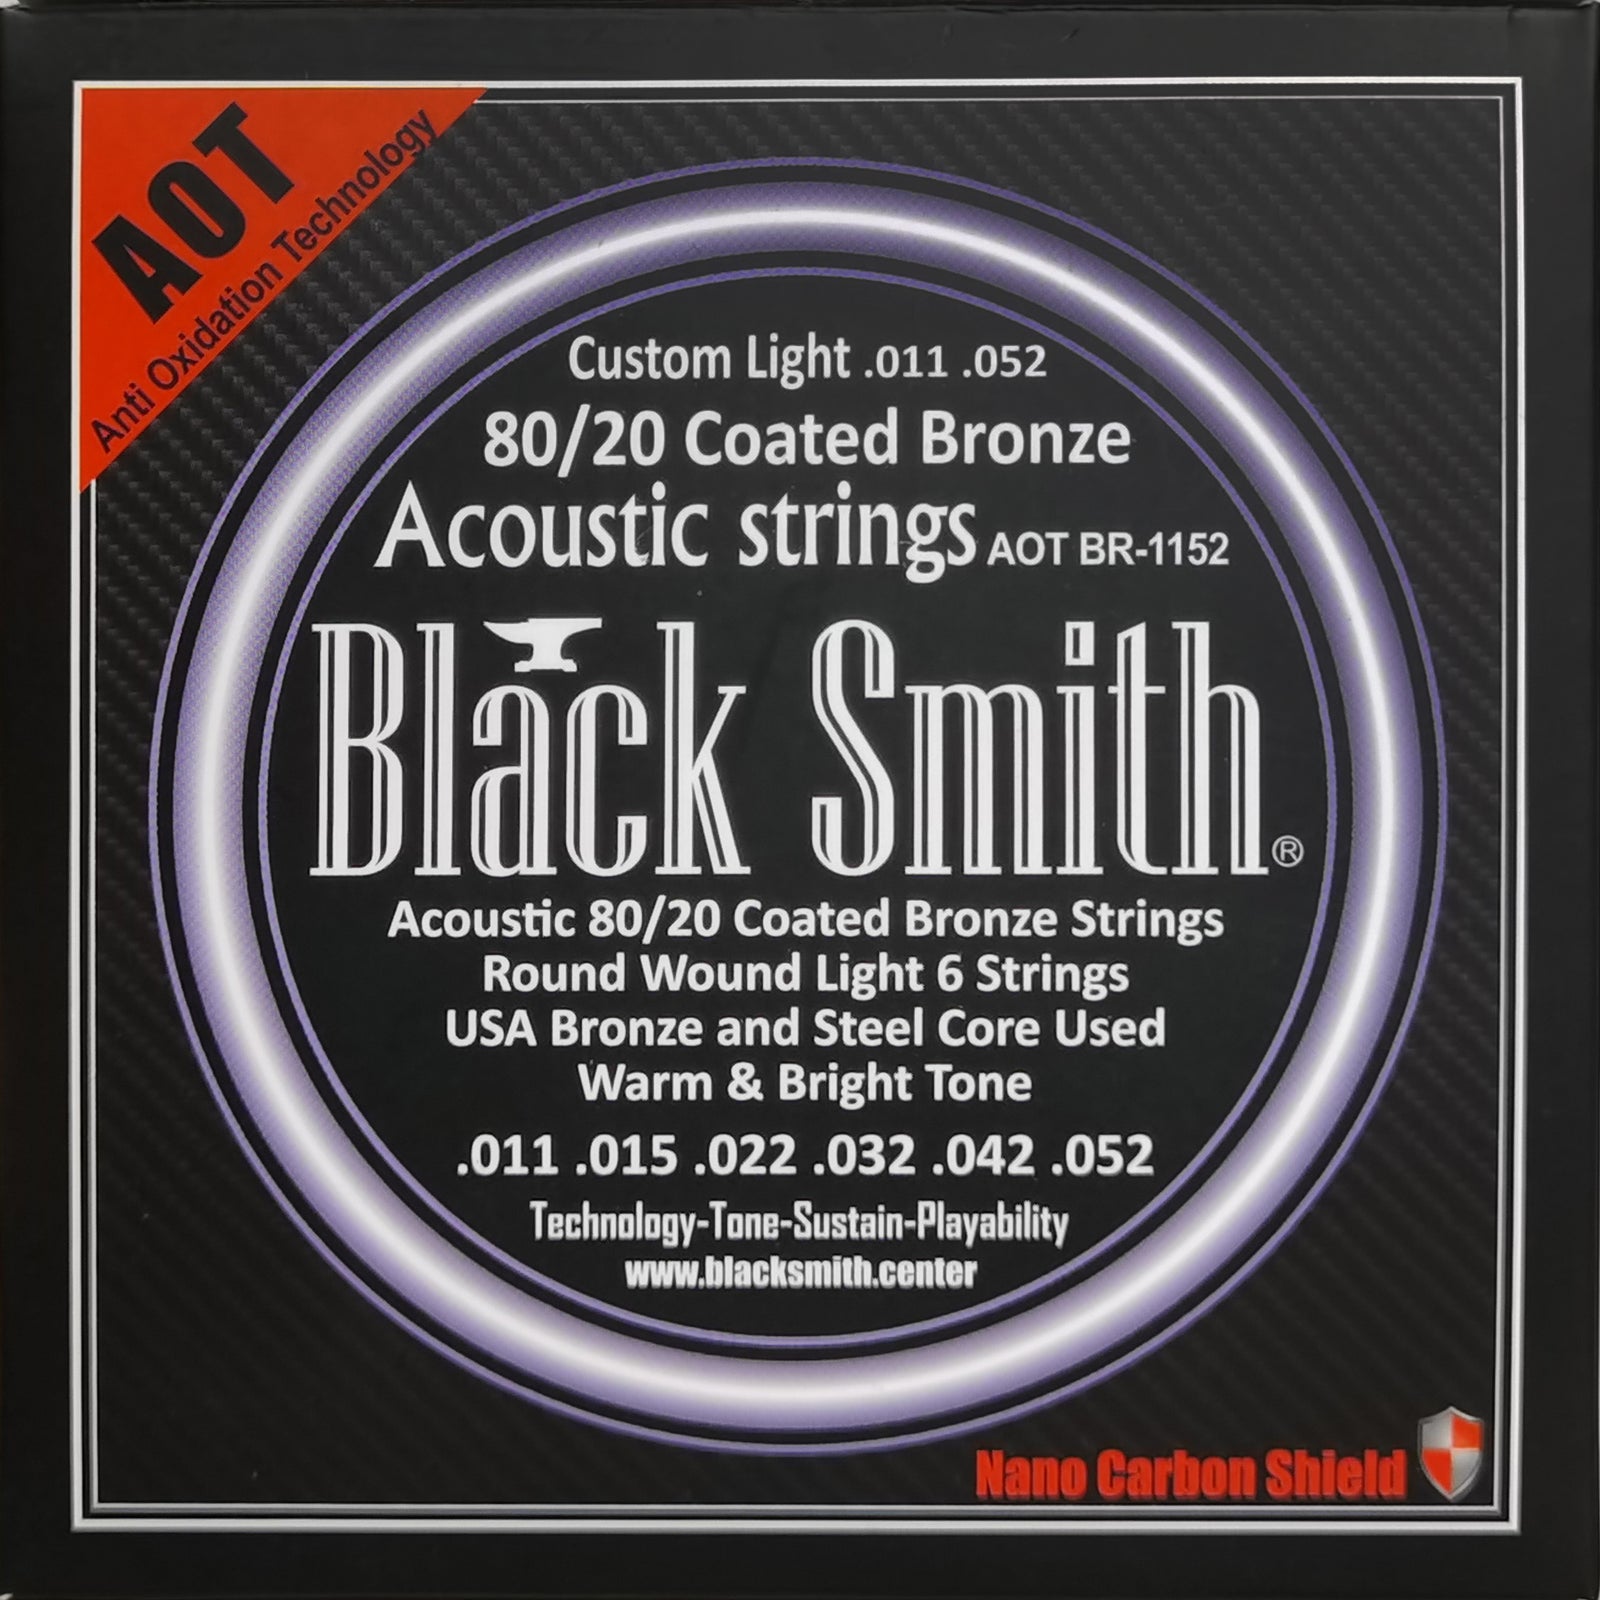 Black Smith ABR-1152 Acoustic Guitar String